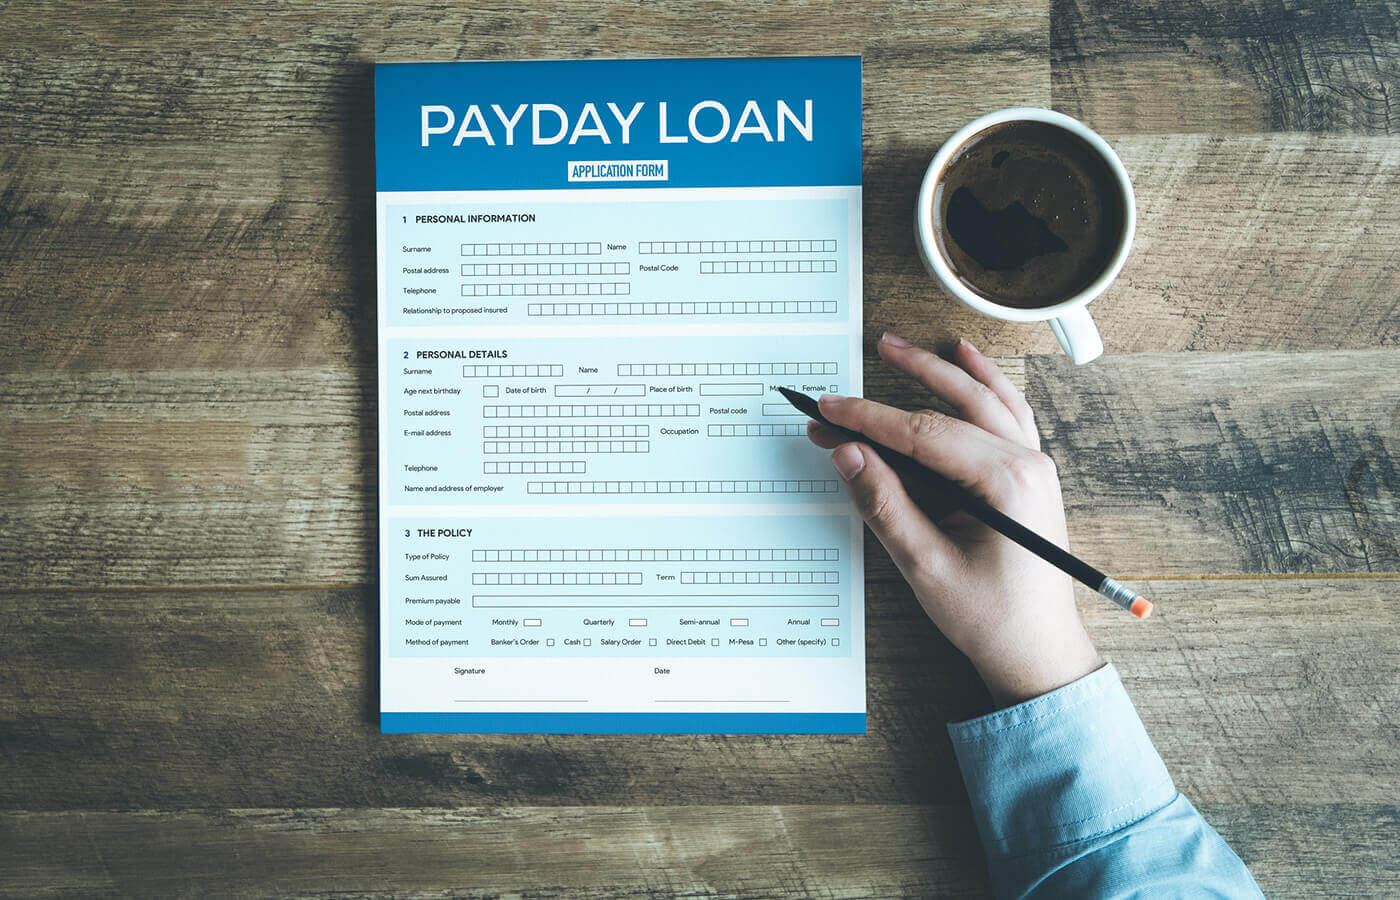 What Percentage of People Default on a Payday Loan and How Can this be Avoided?